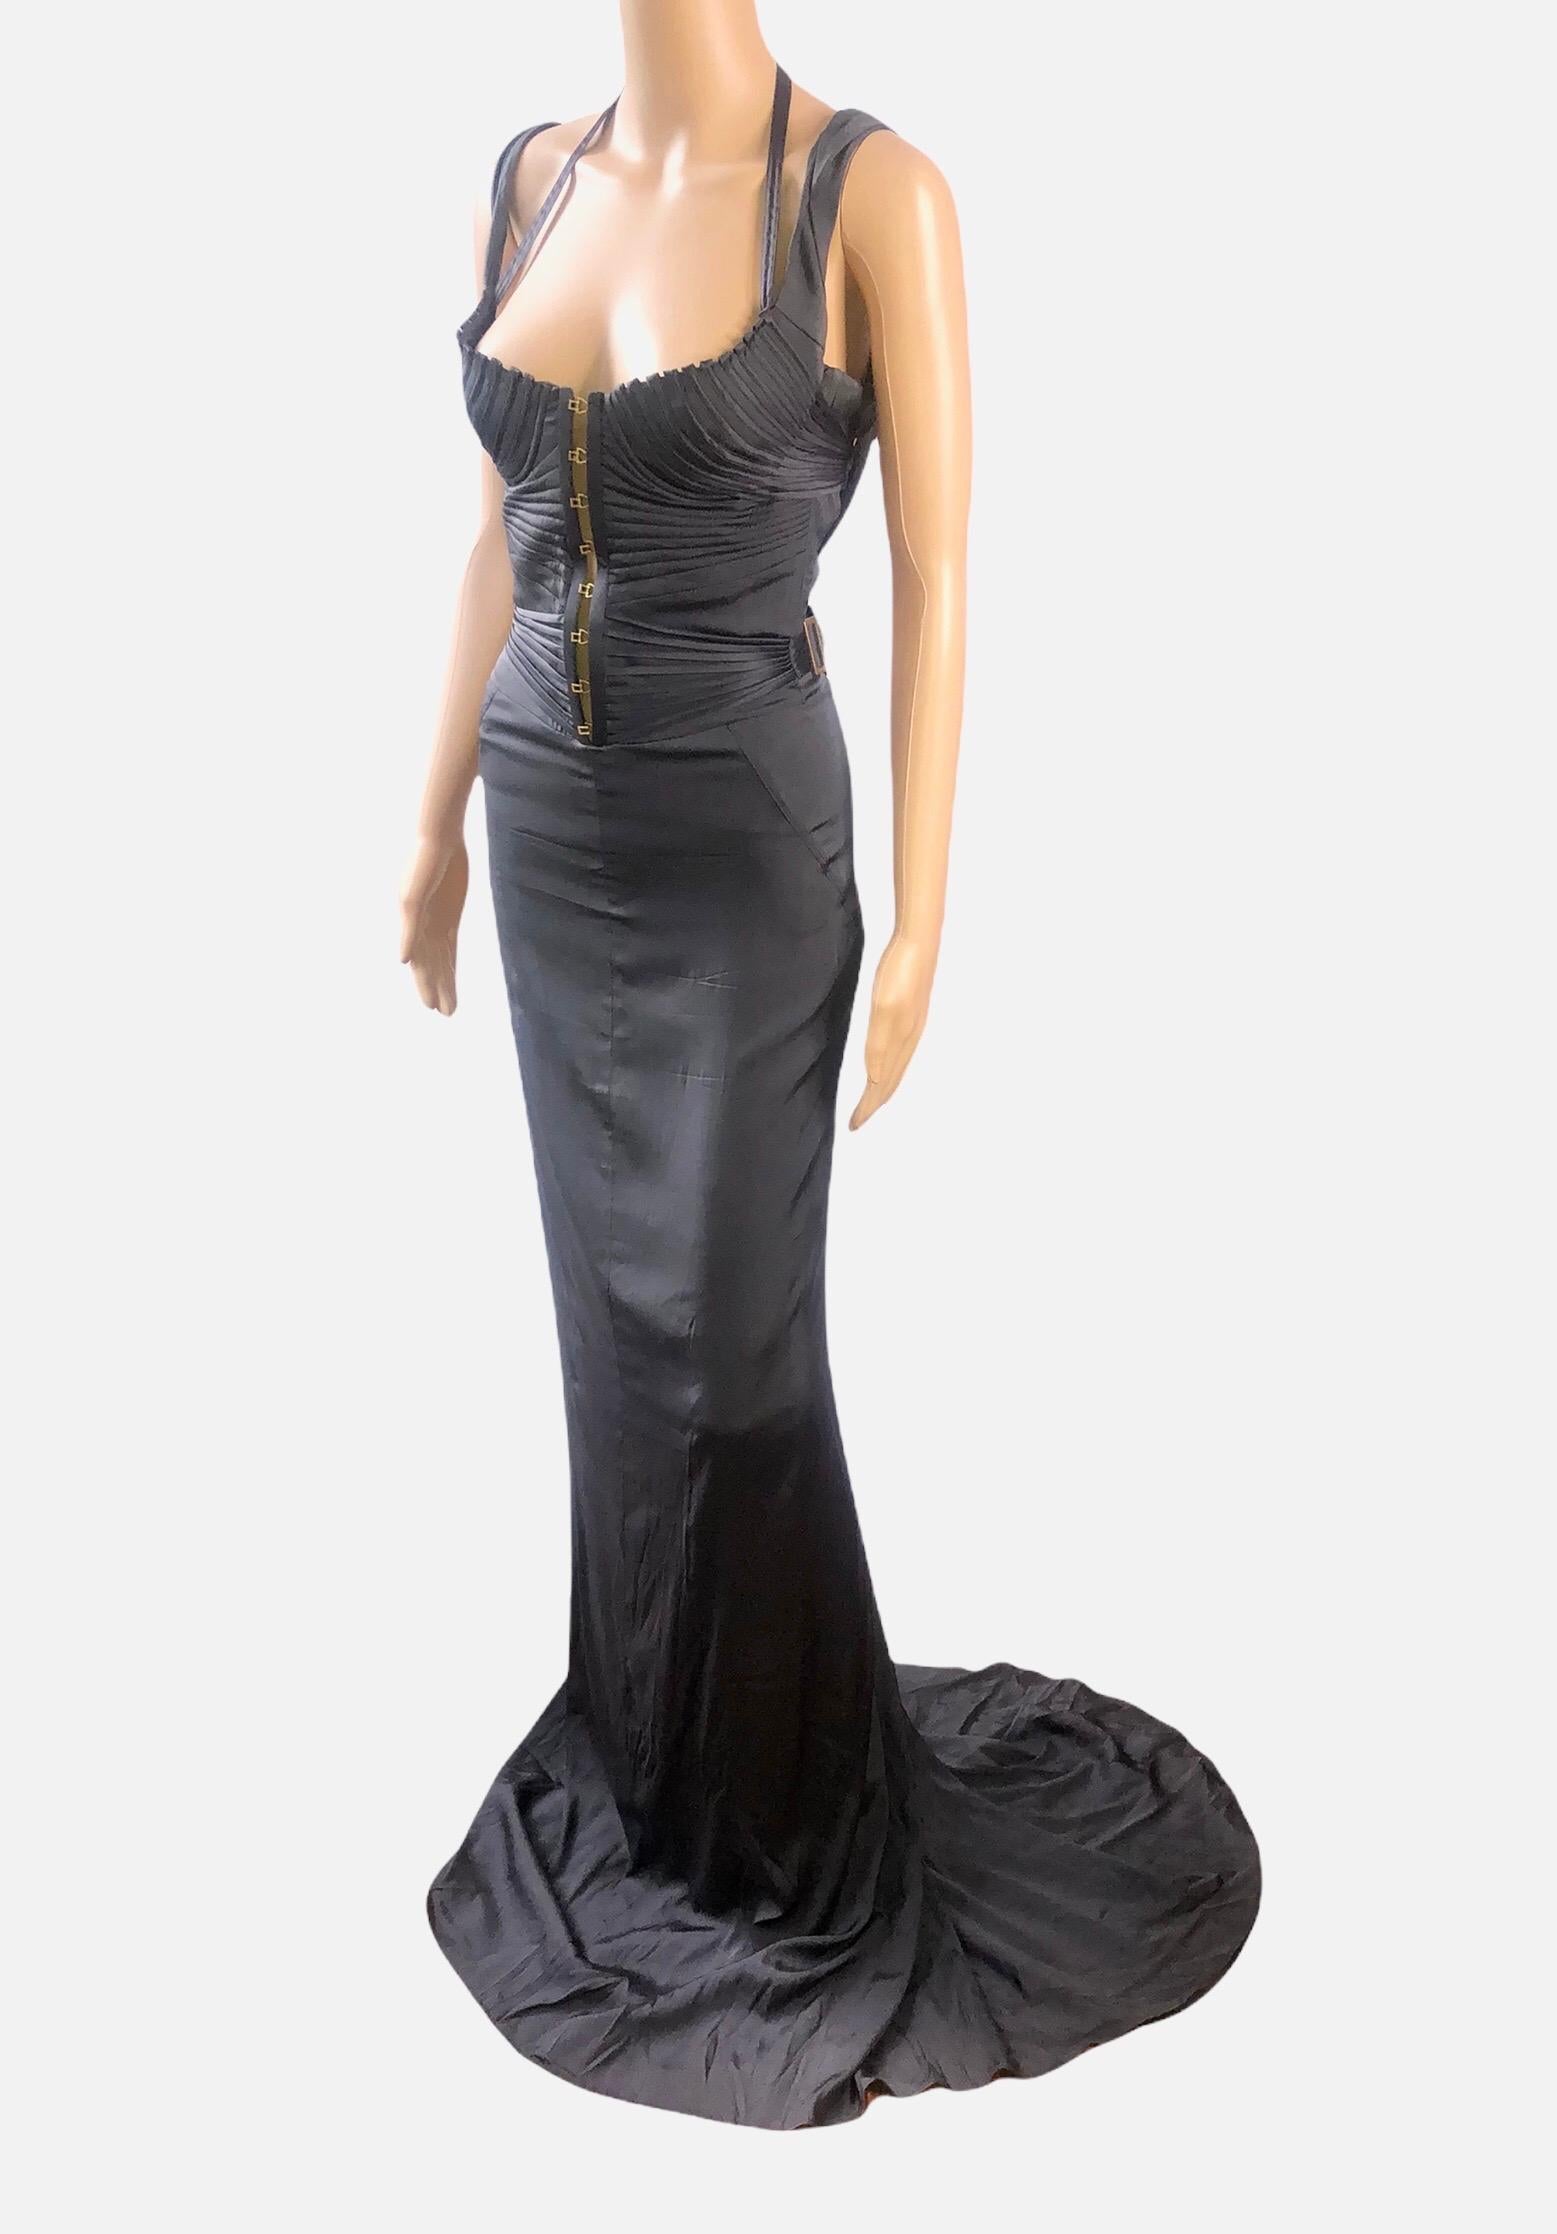 Tom Ford for Gucci F/W 2003 Bustier Corset Silk Evening Dress Gown 4